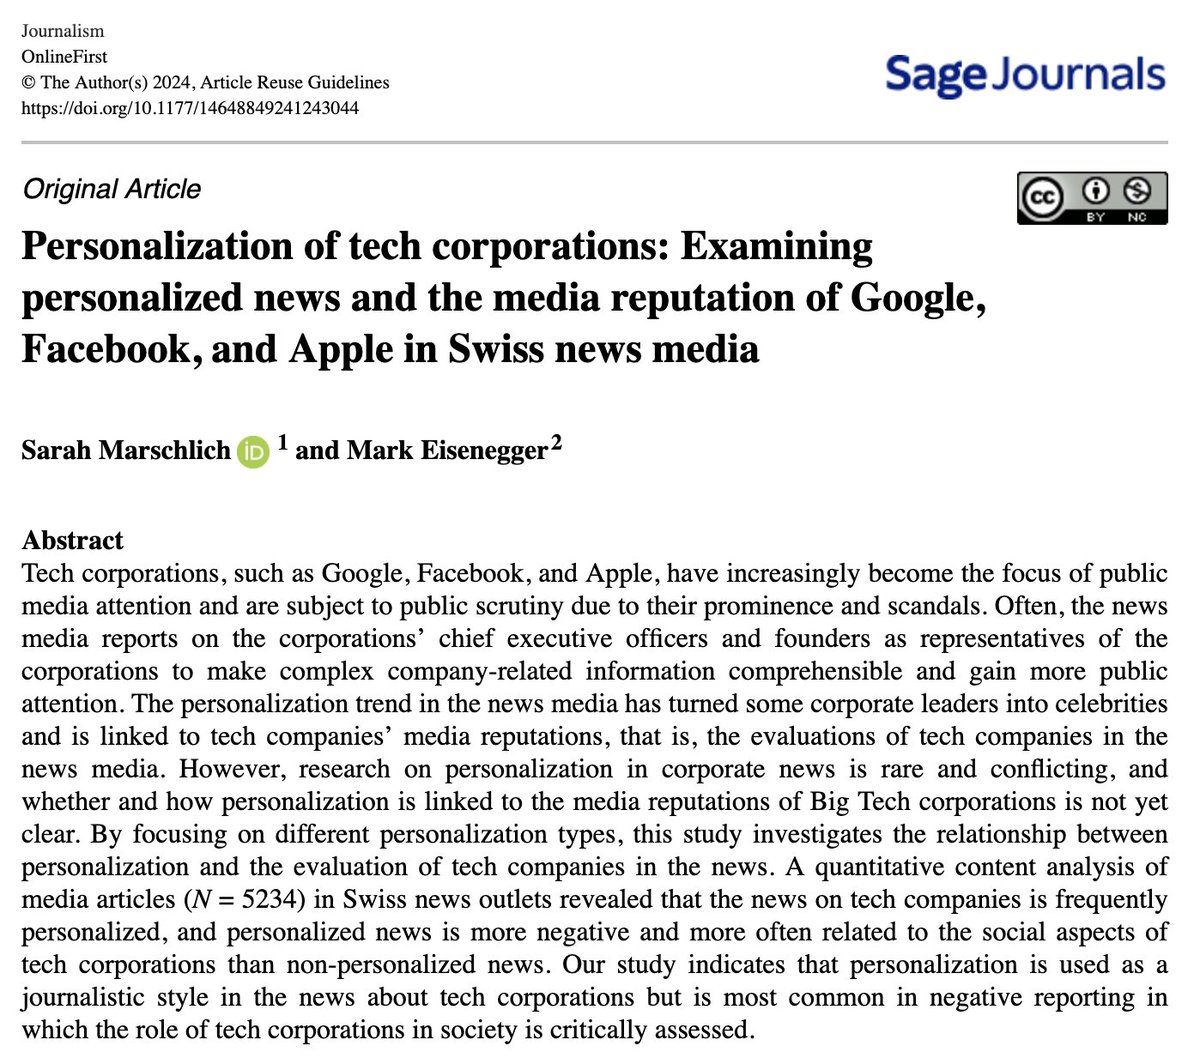 🚨 PubAlert 🚨 In our #openaccess publication @Mark_Eisenegger & I explore how personalization, i.e., the focus on personalities such as CEOs, in the news is related to the reputation of #BigTech in the news 💡We show: Personalized news are more negative 👉shorturl.at/xSW78